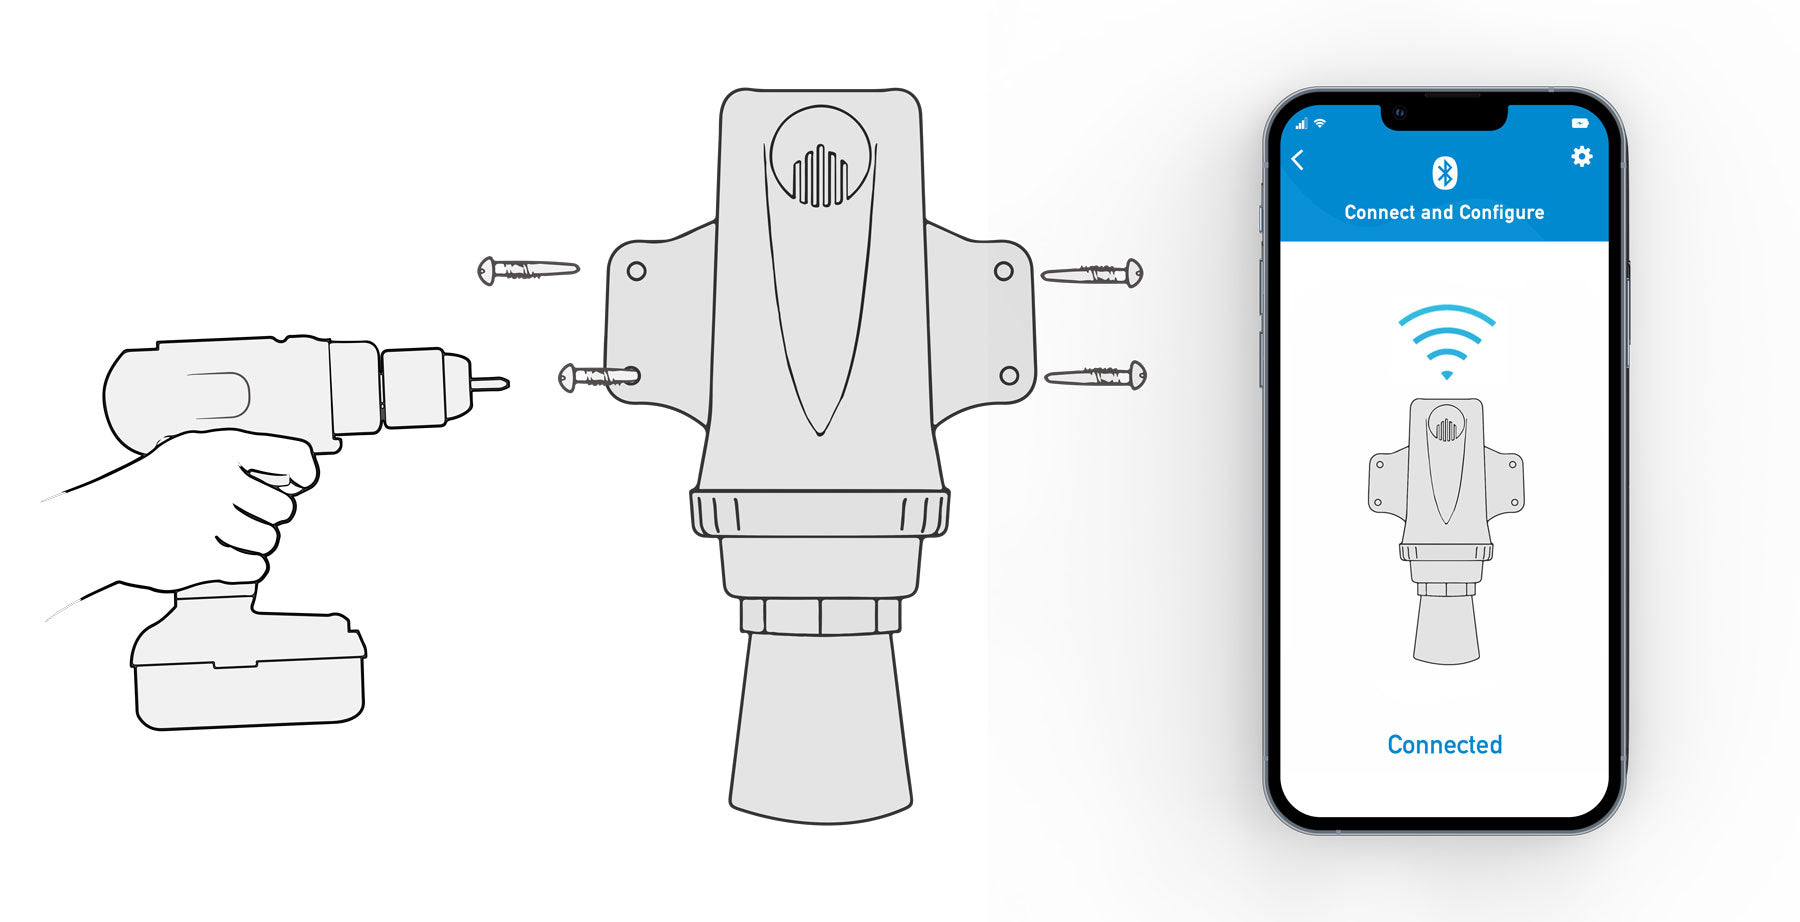 Diagram showing how to quickly attach and connect to sensor